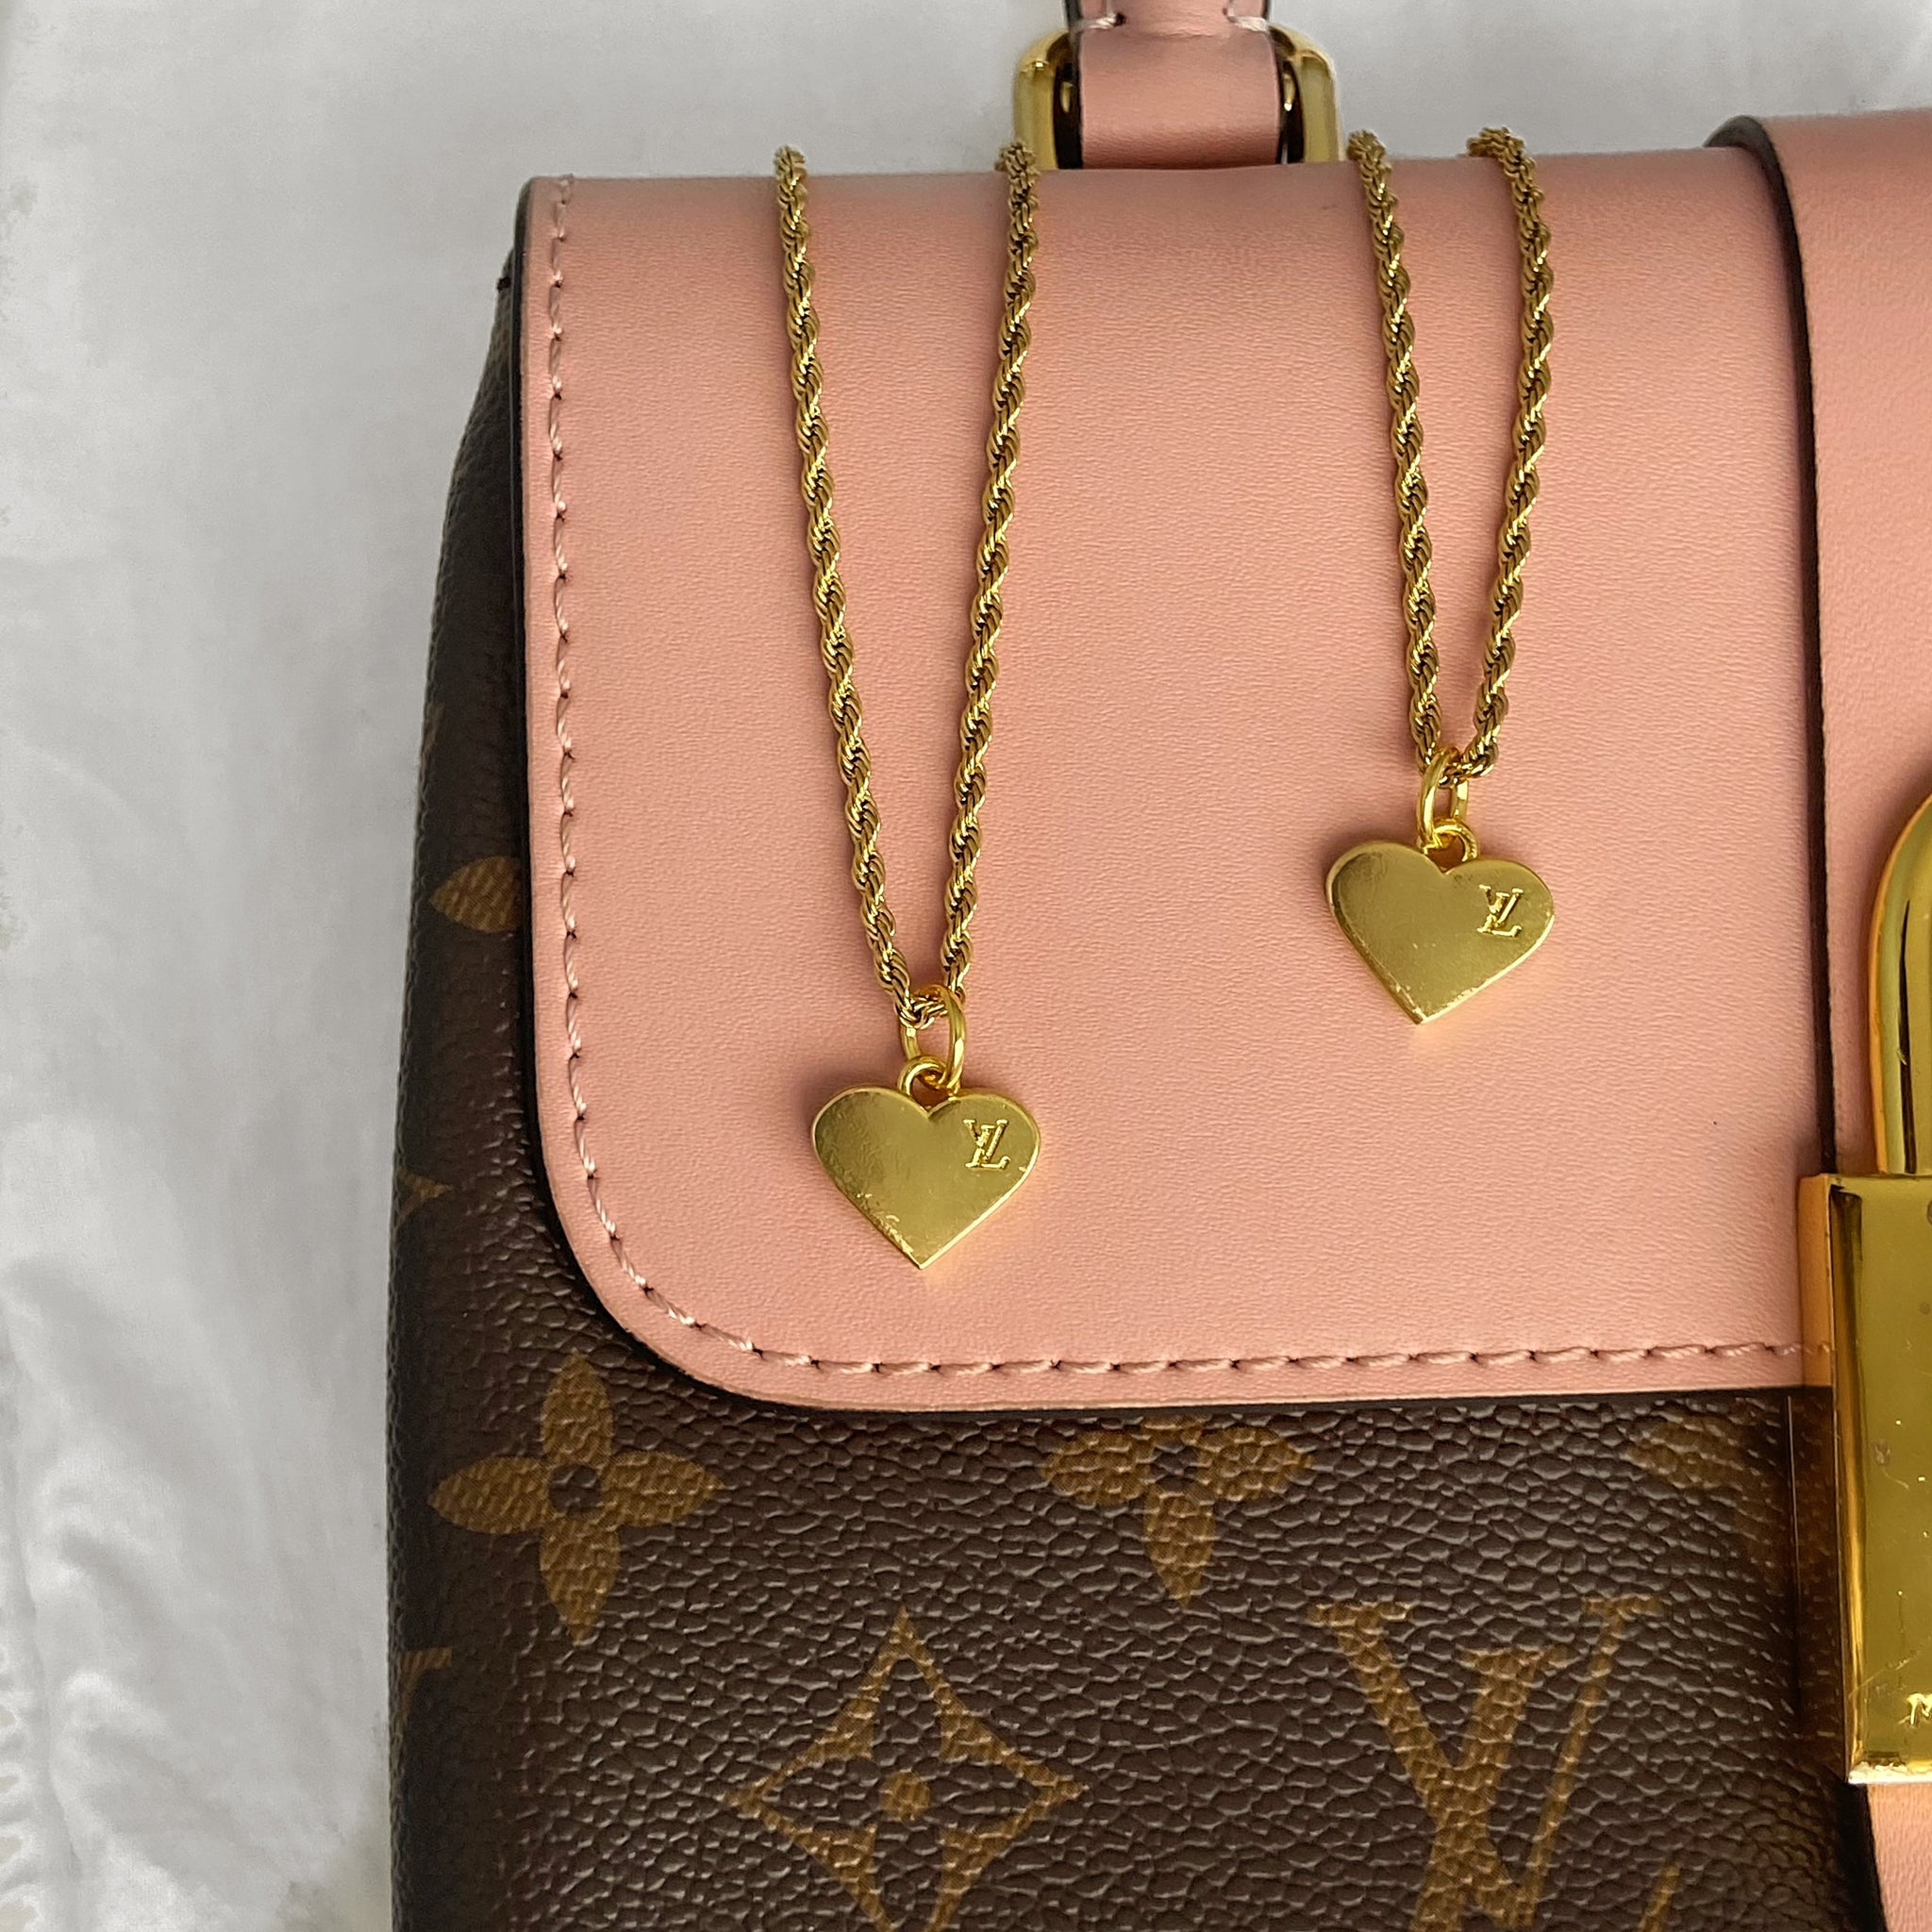 Louis Vuitton Fall In Love Heart Necklace Gold Tone – Coco Approved Studio